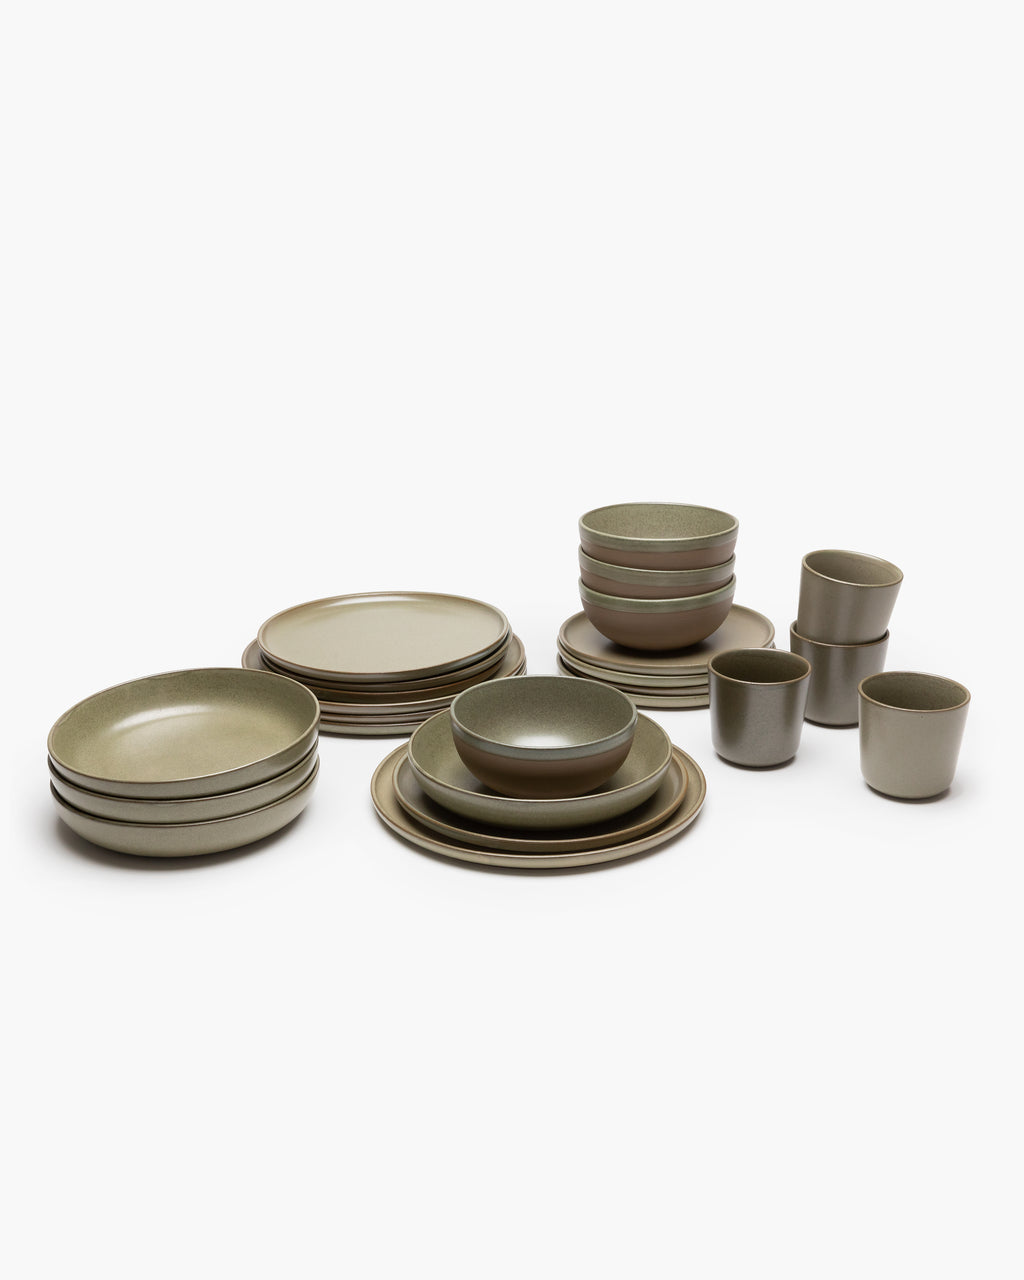 Full Set 24 pieces - Surface tableware by Sergio Herman - camogreen